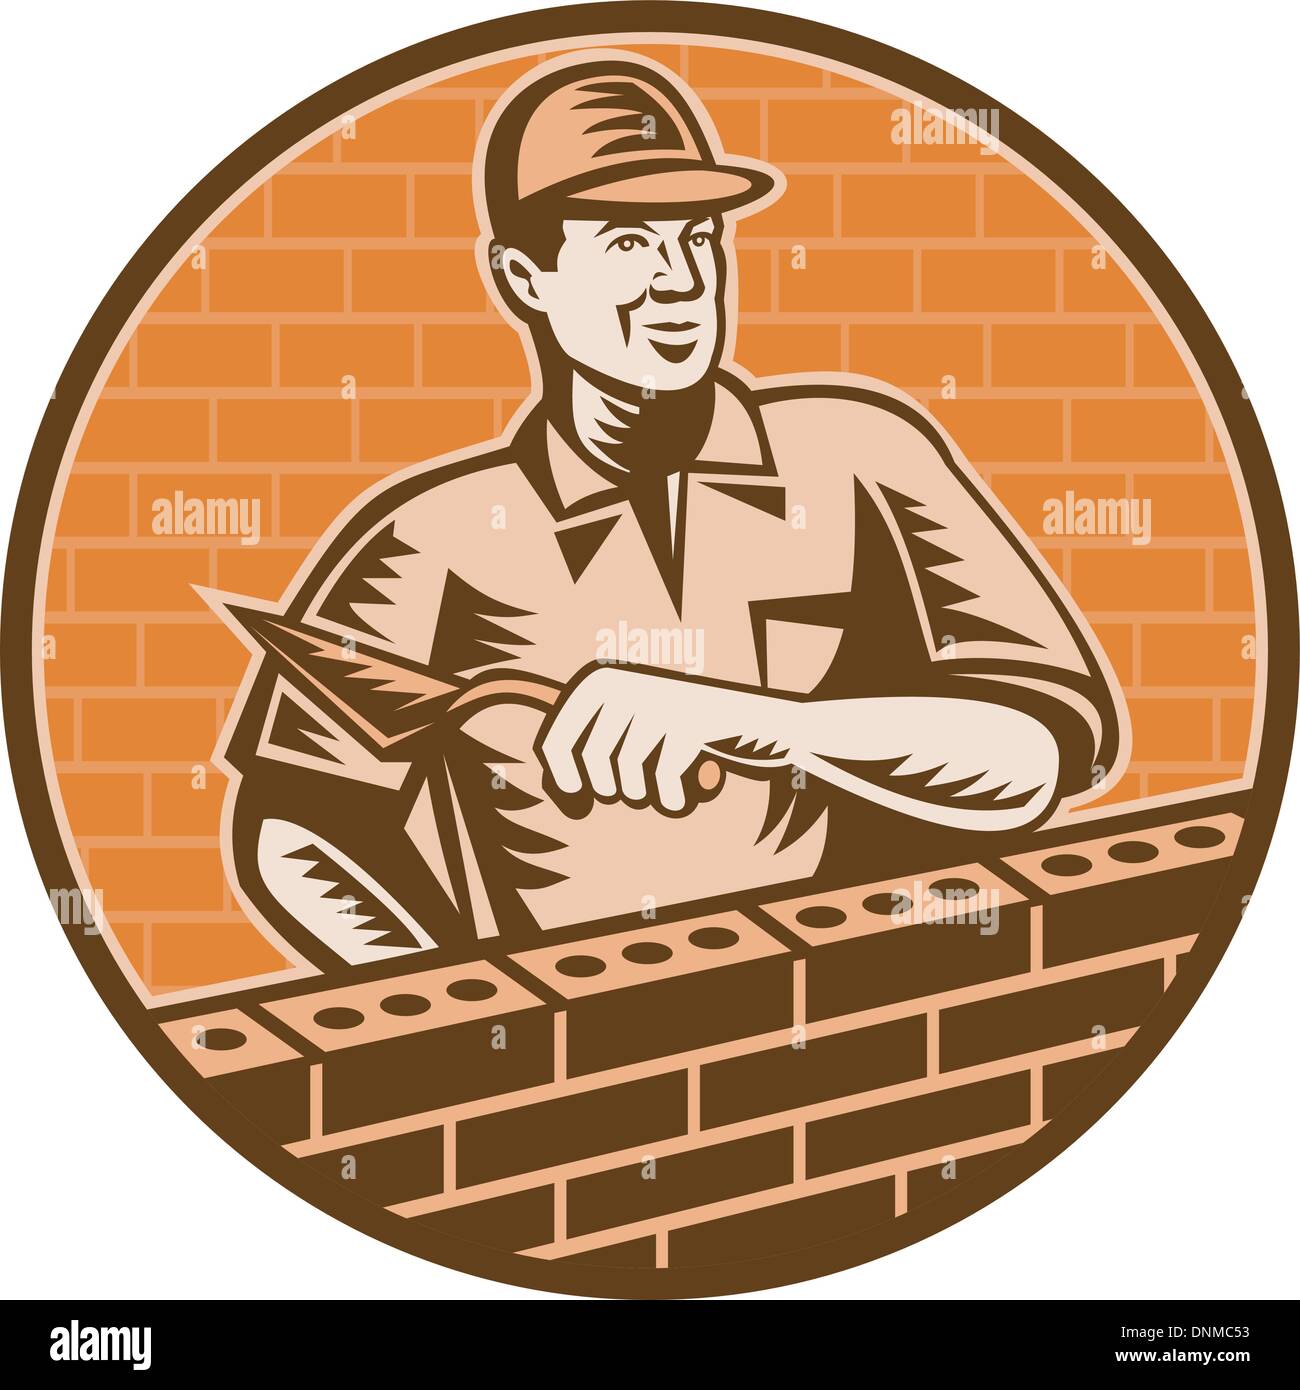 illustration of a Mason worker or brick layer holding a trowel working on brick wall done in woodcut style. Stock Vector